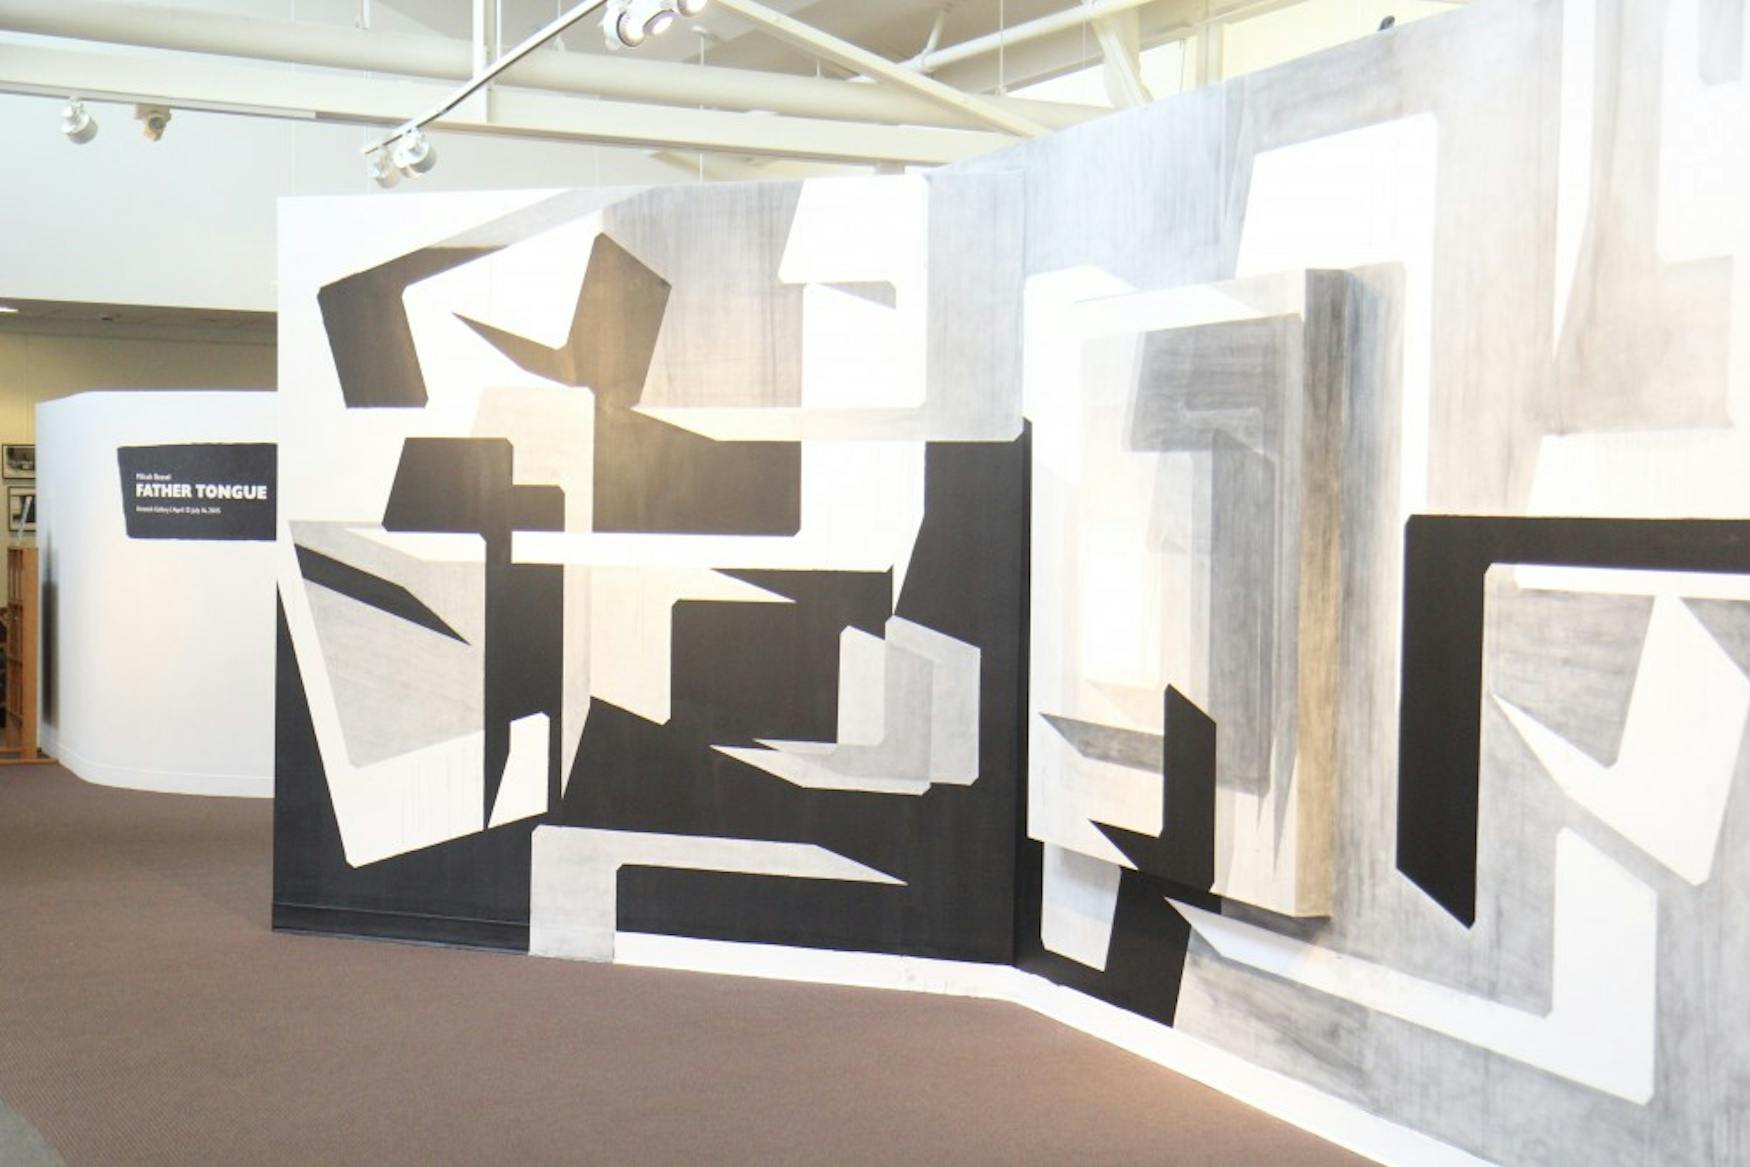 3-D PAINTING: The wall drawings use three dimensional elements, such as pieces that jut out from the wall, in order to change the way the Hebrew letters are perceived.